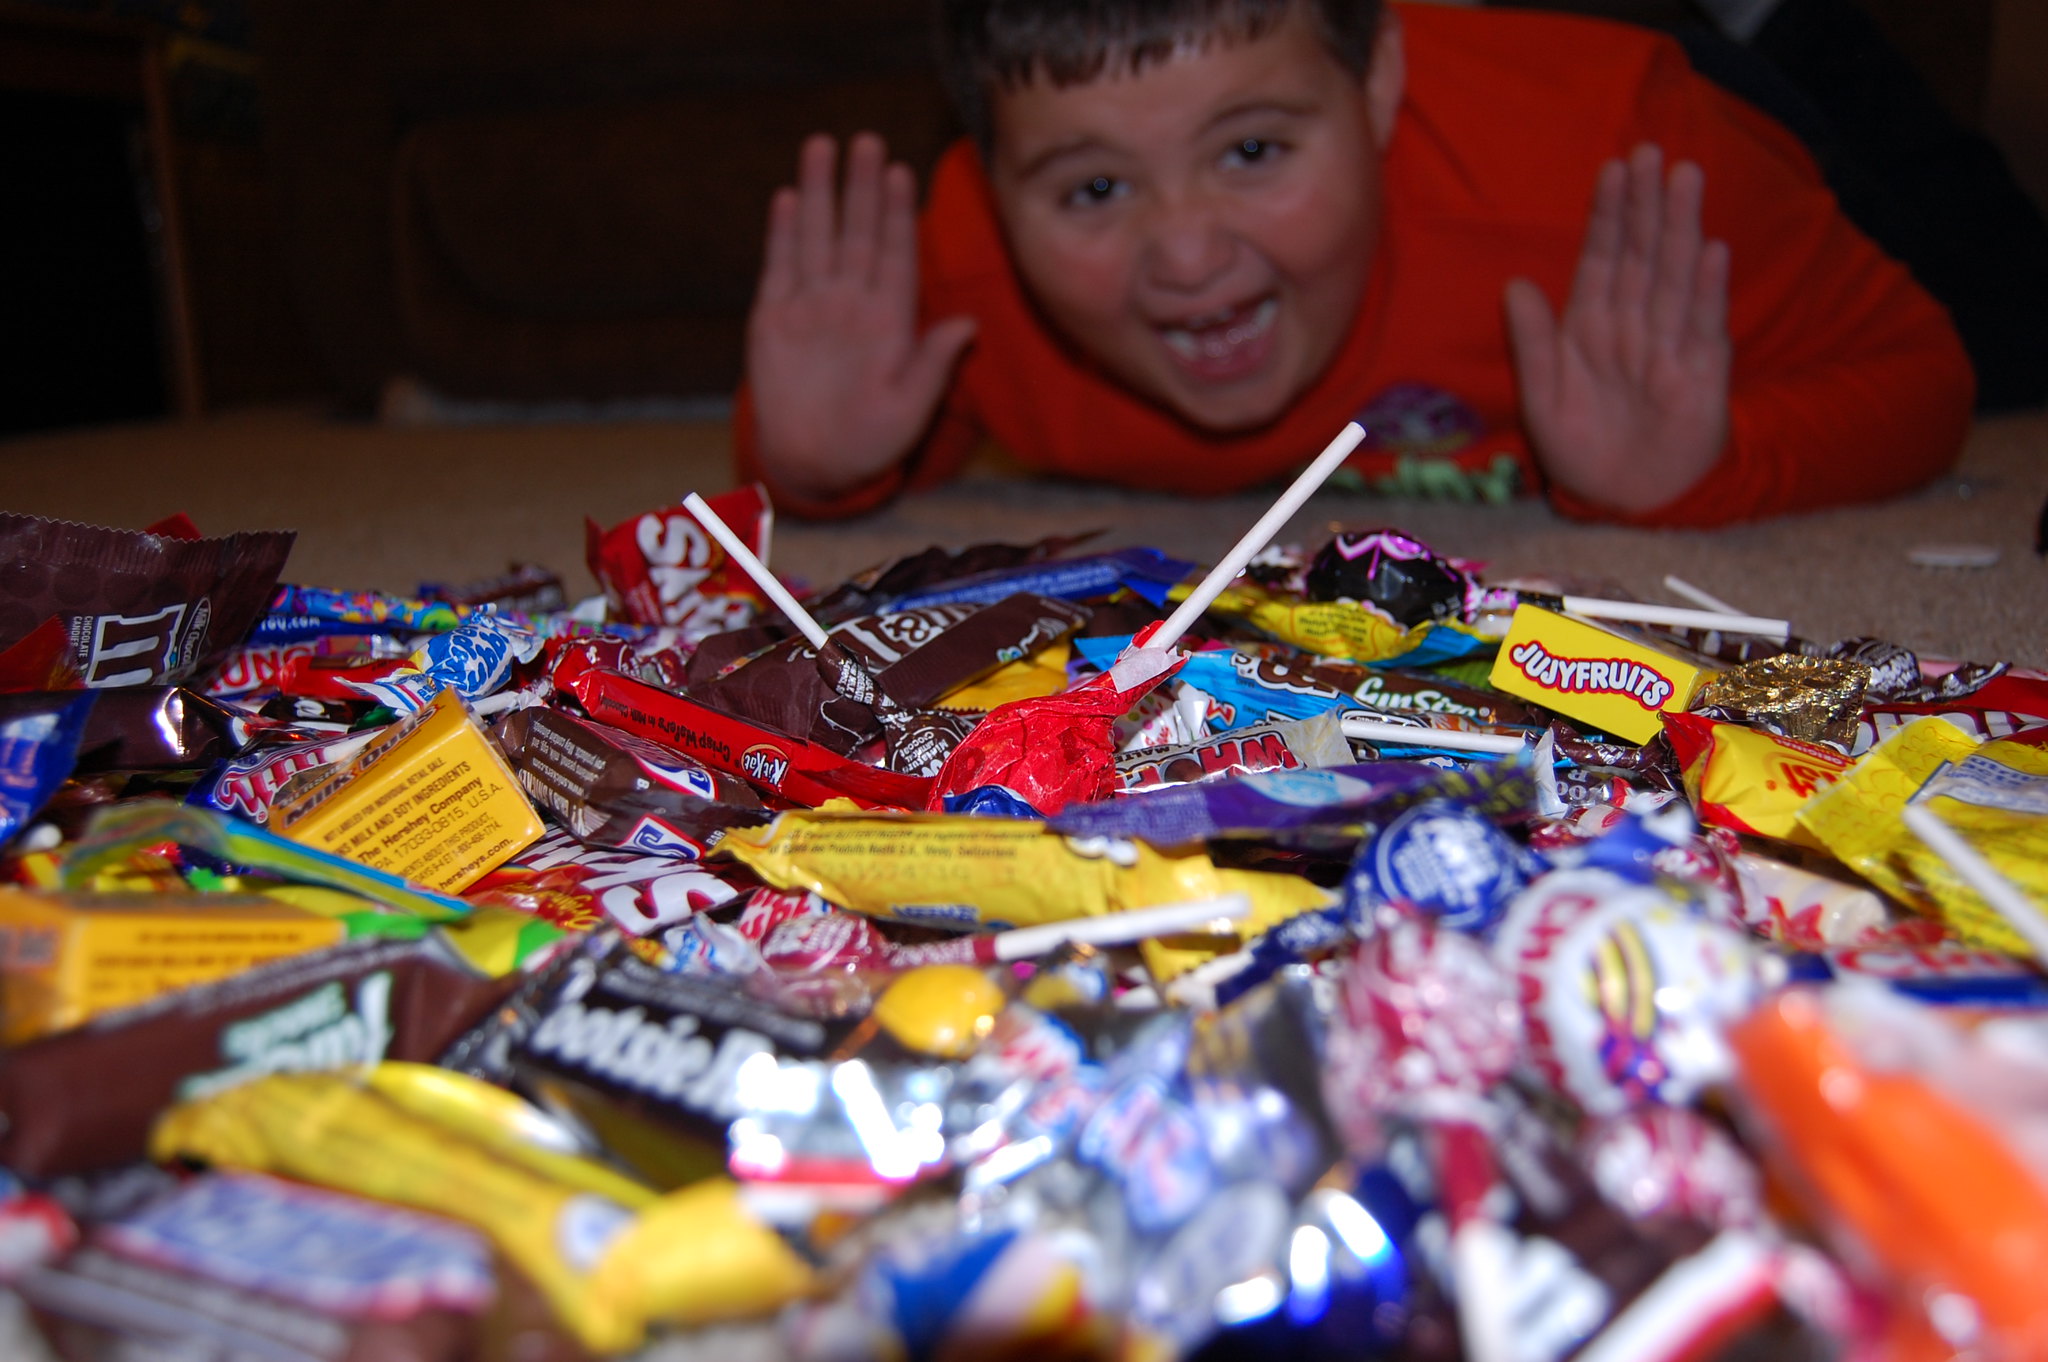 Not All Candy Is Candy… for Tax Purposes Anyways